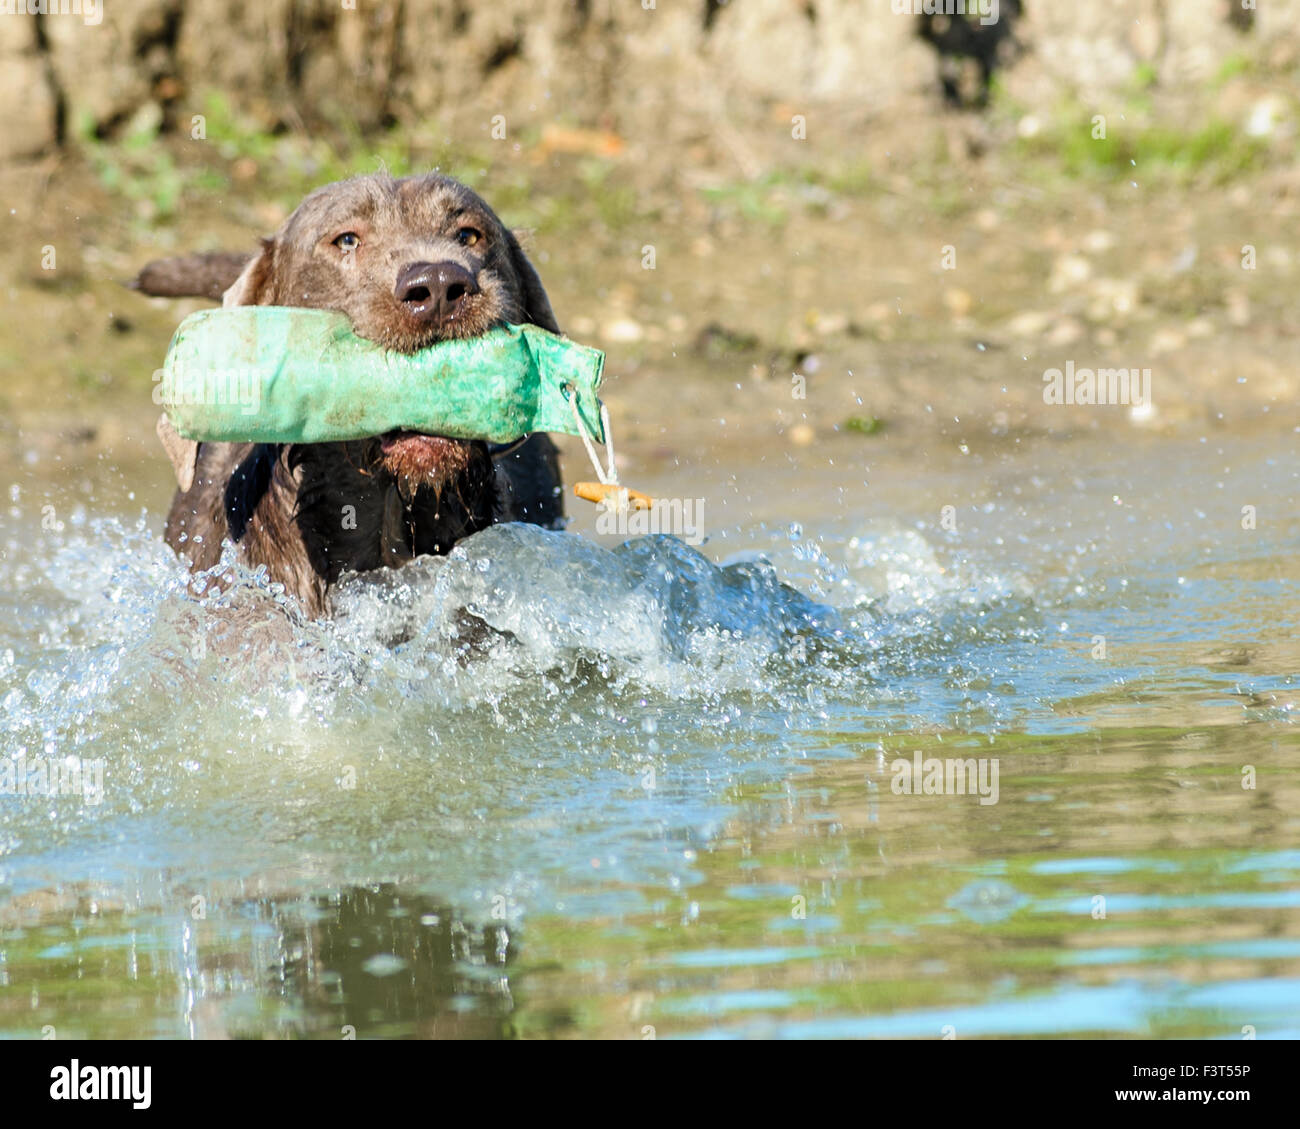 Slovakian Rough Haired Pointer dog swimming in a lake with a training dummy Stock Photo